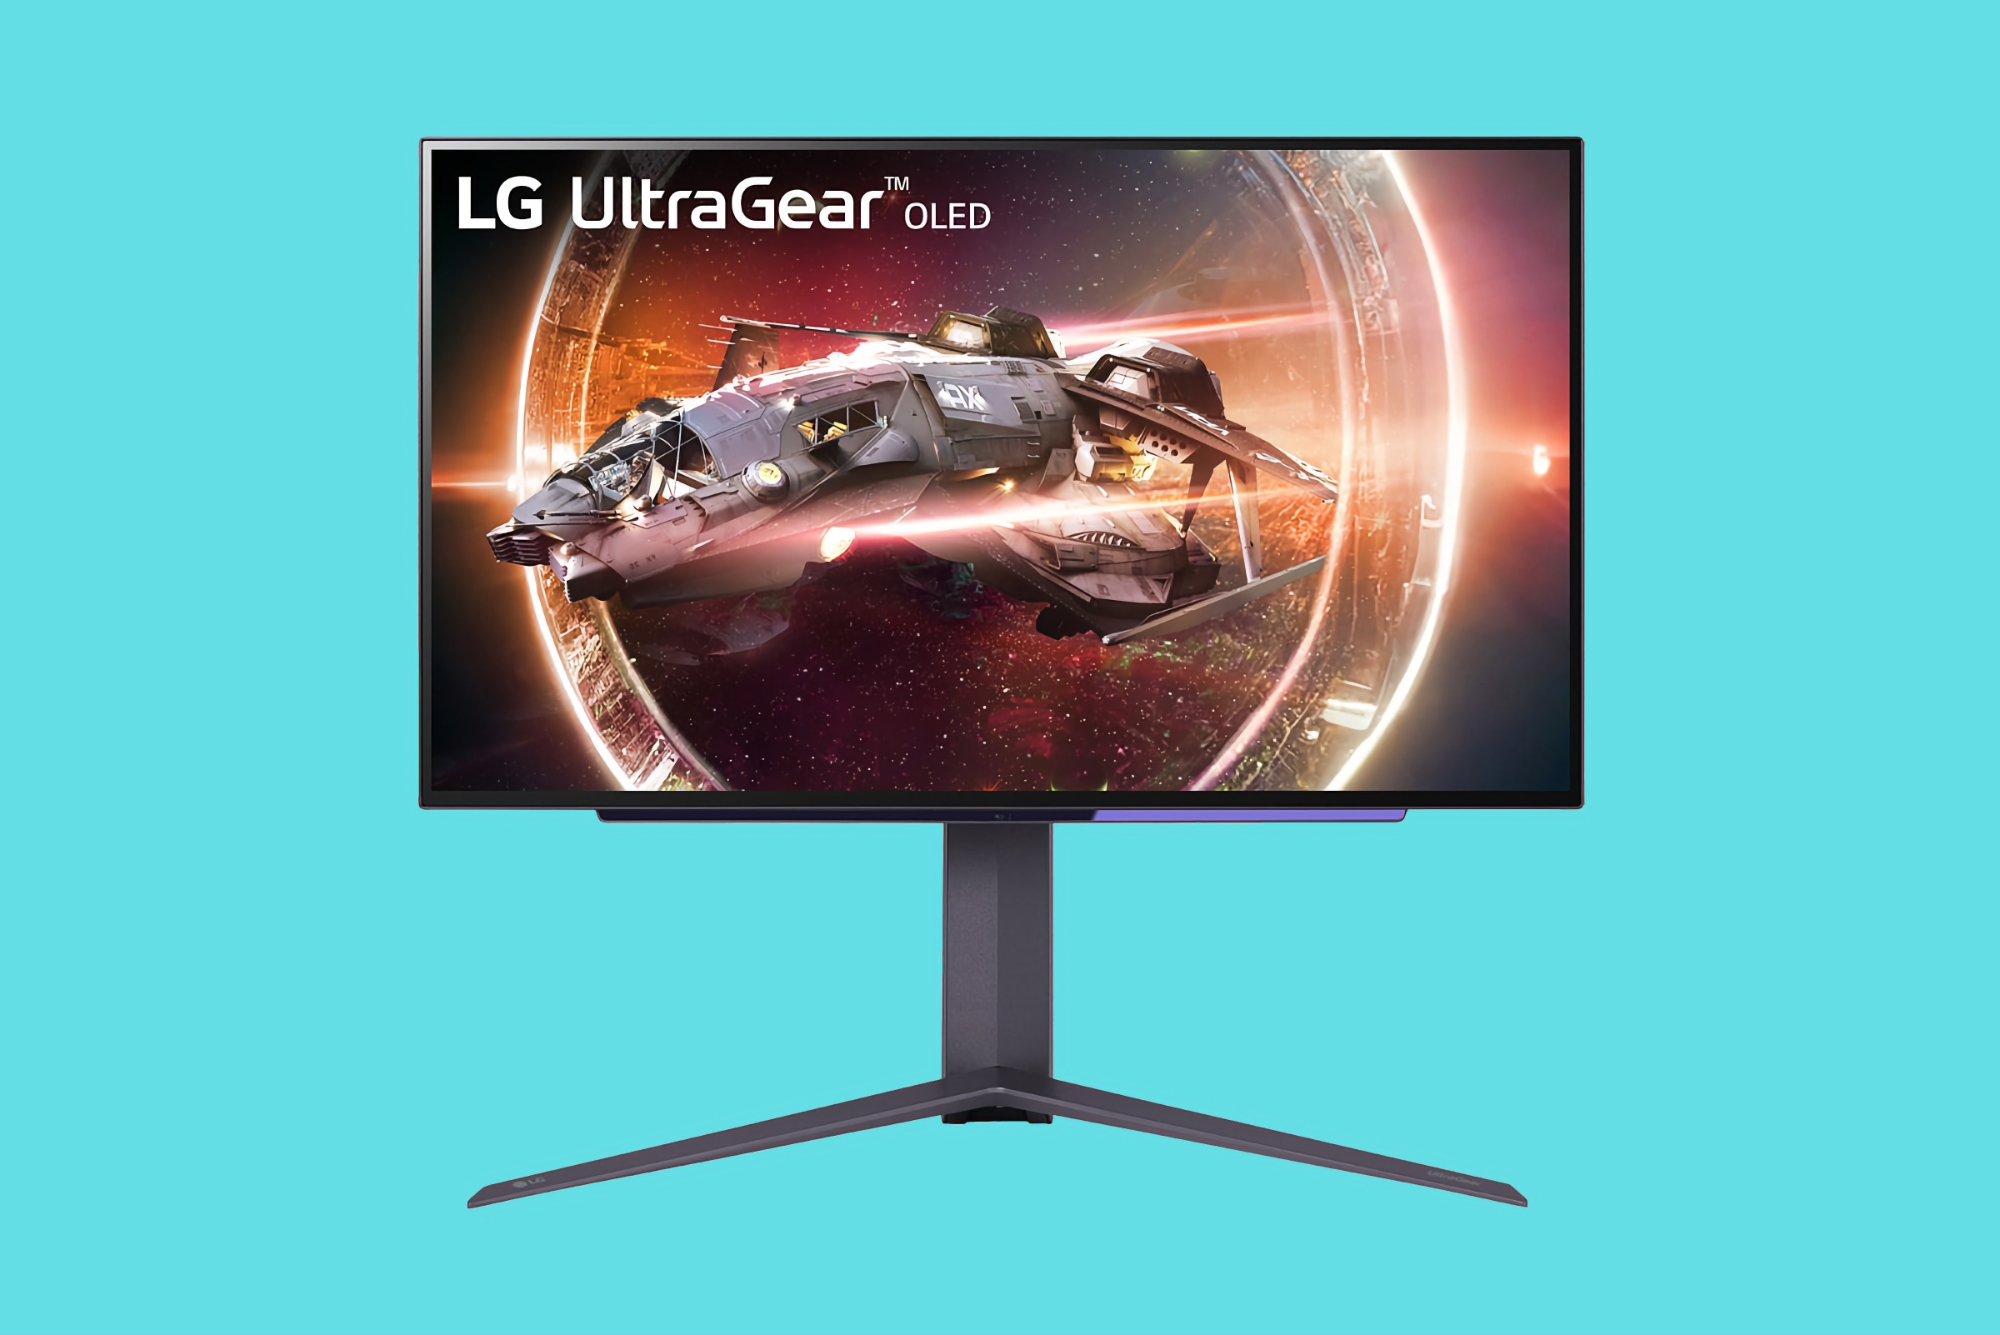 LG UltraGear 27GS95QE with 240Hz OLED screen has made its debut outside China